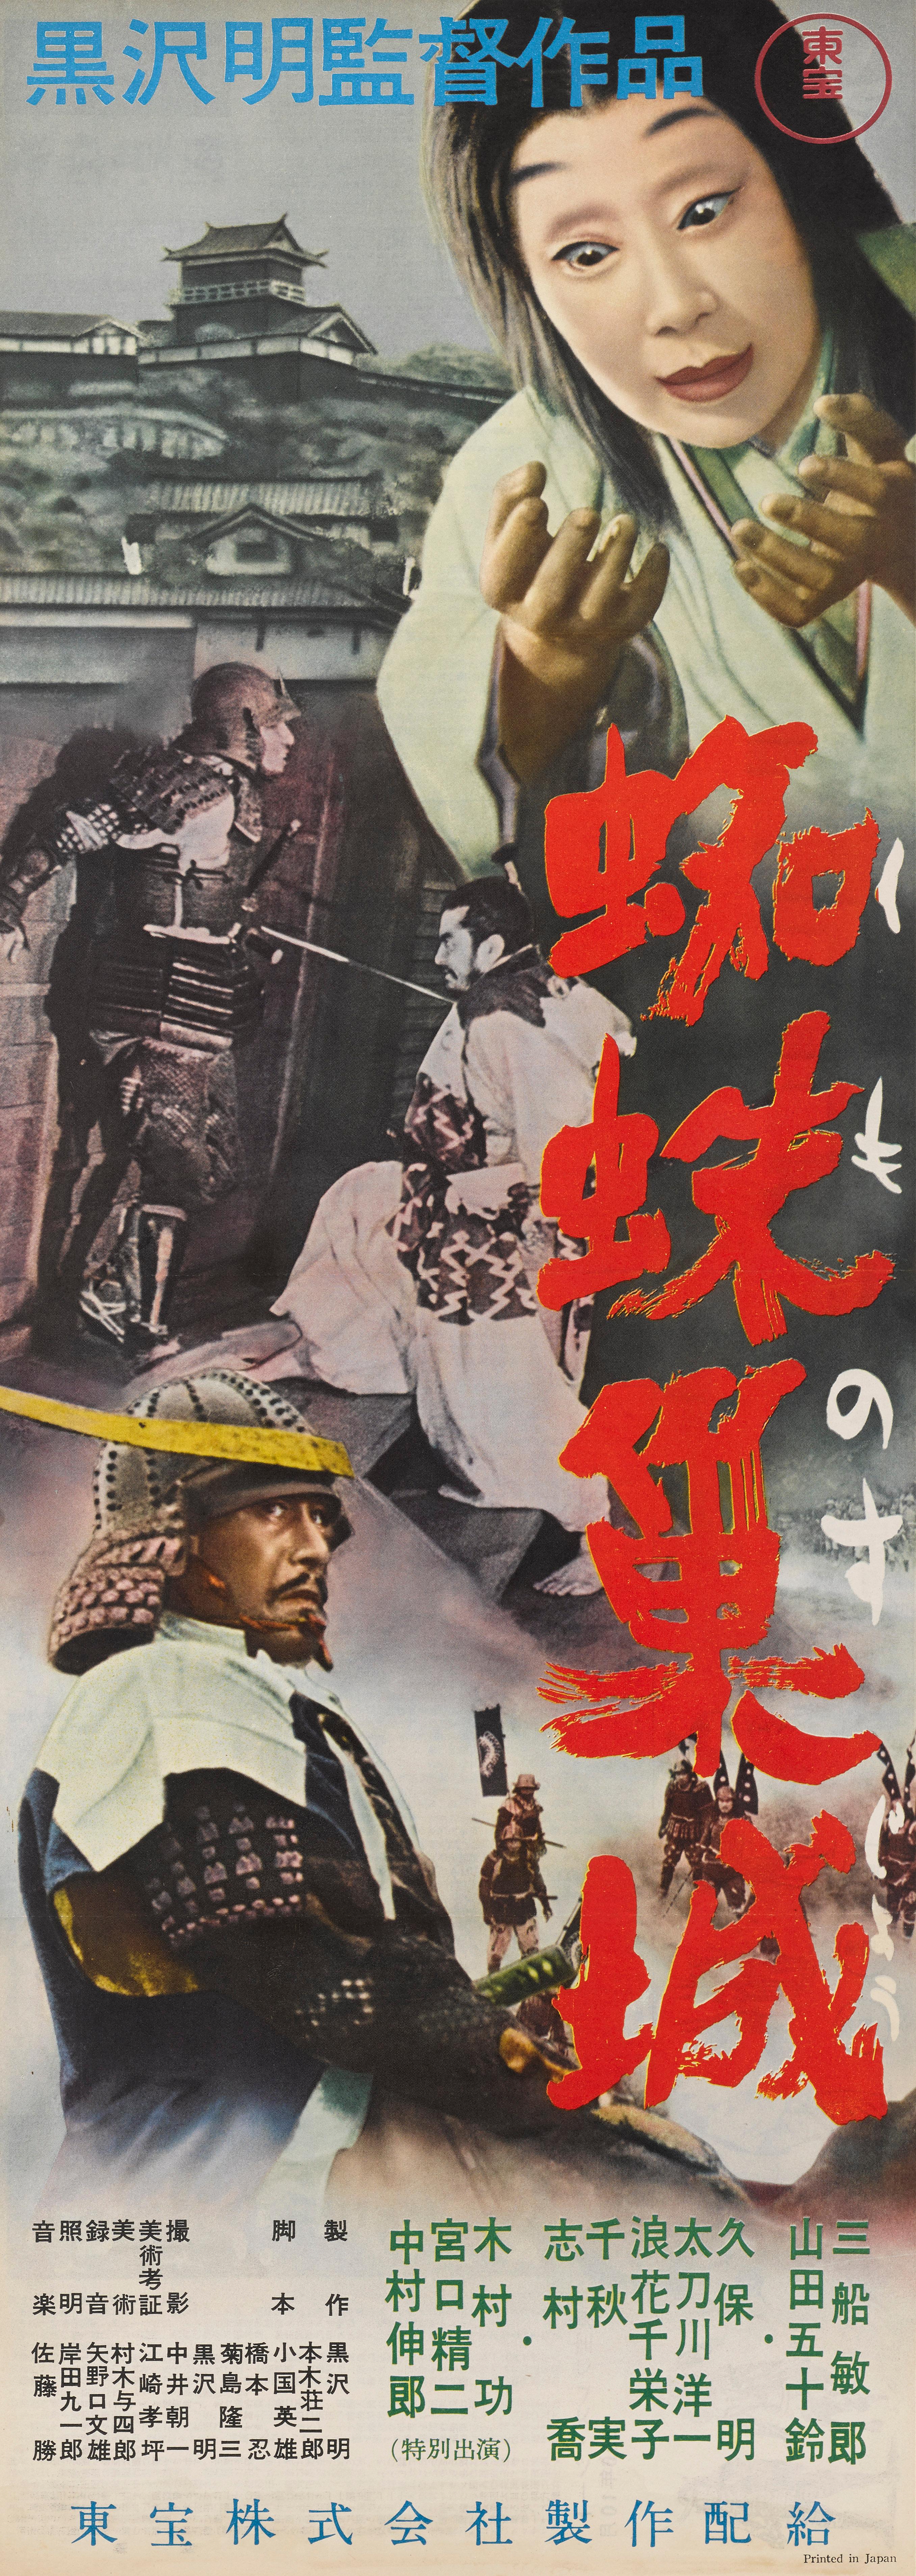 throne of blood movie poster